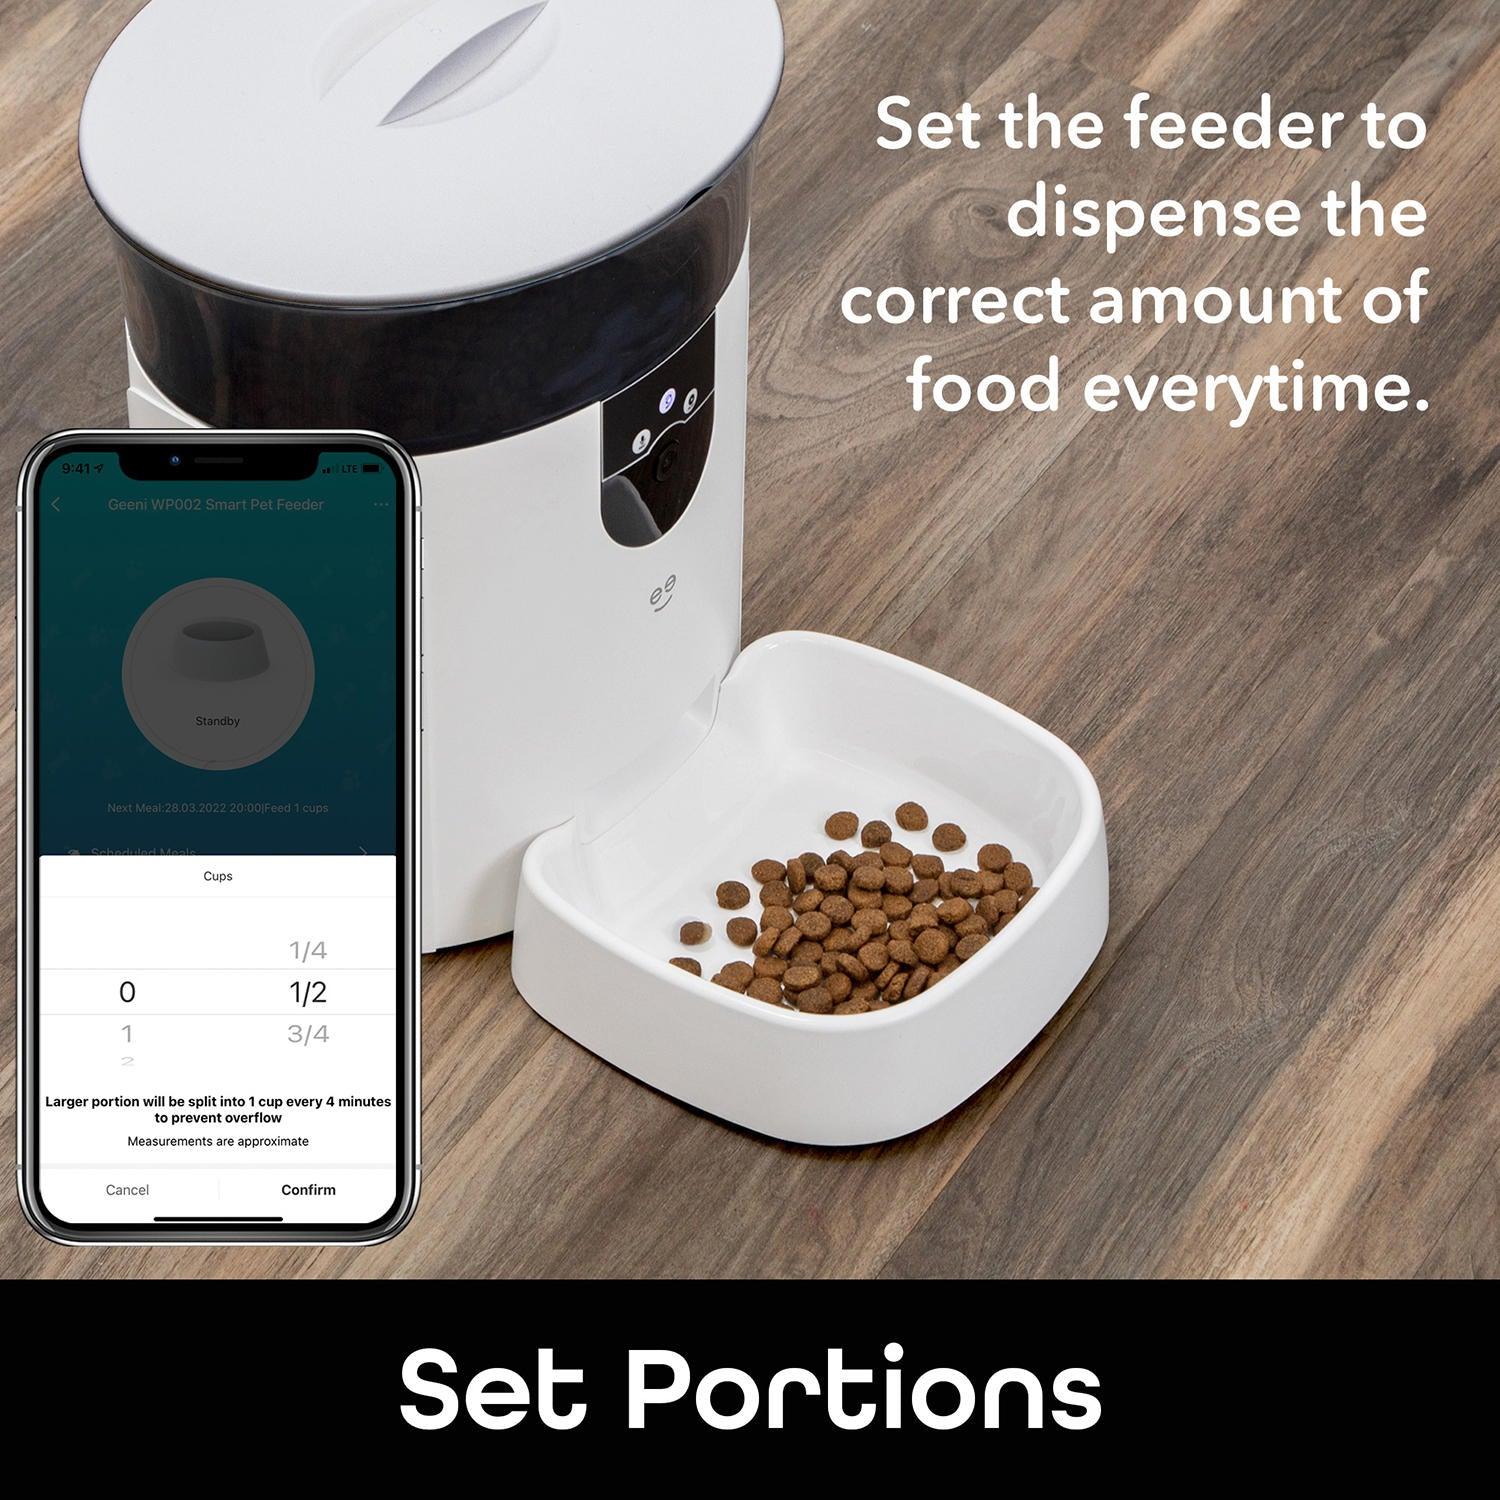 Geeni PetConnect Automatic Feeder with Camera - 7L - Grovano